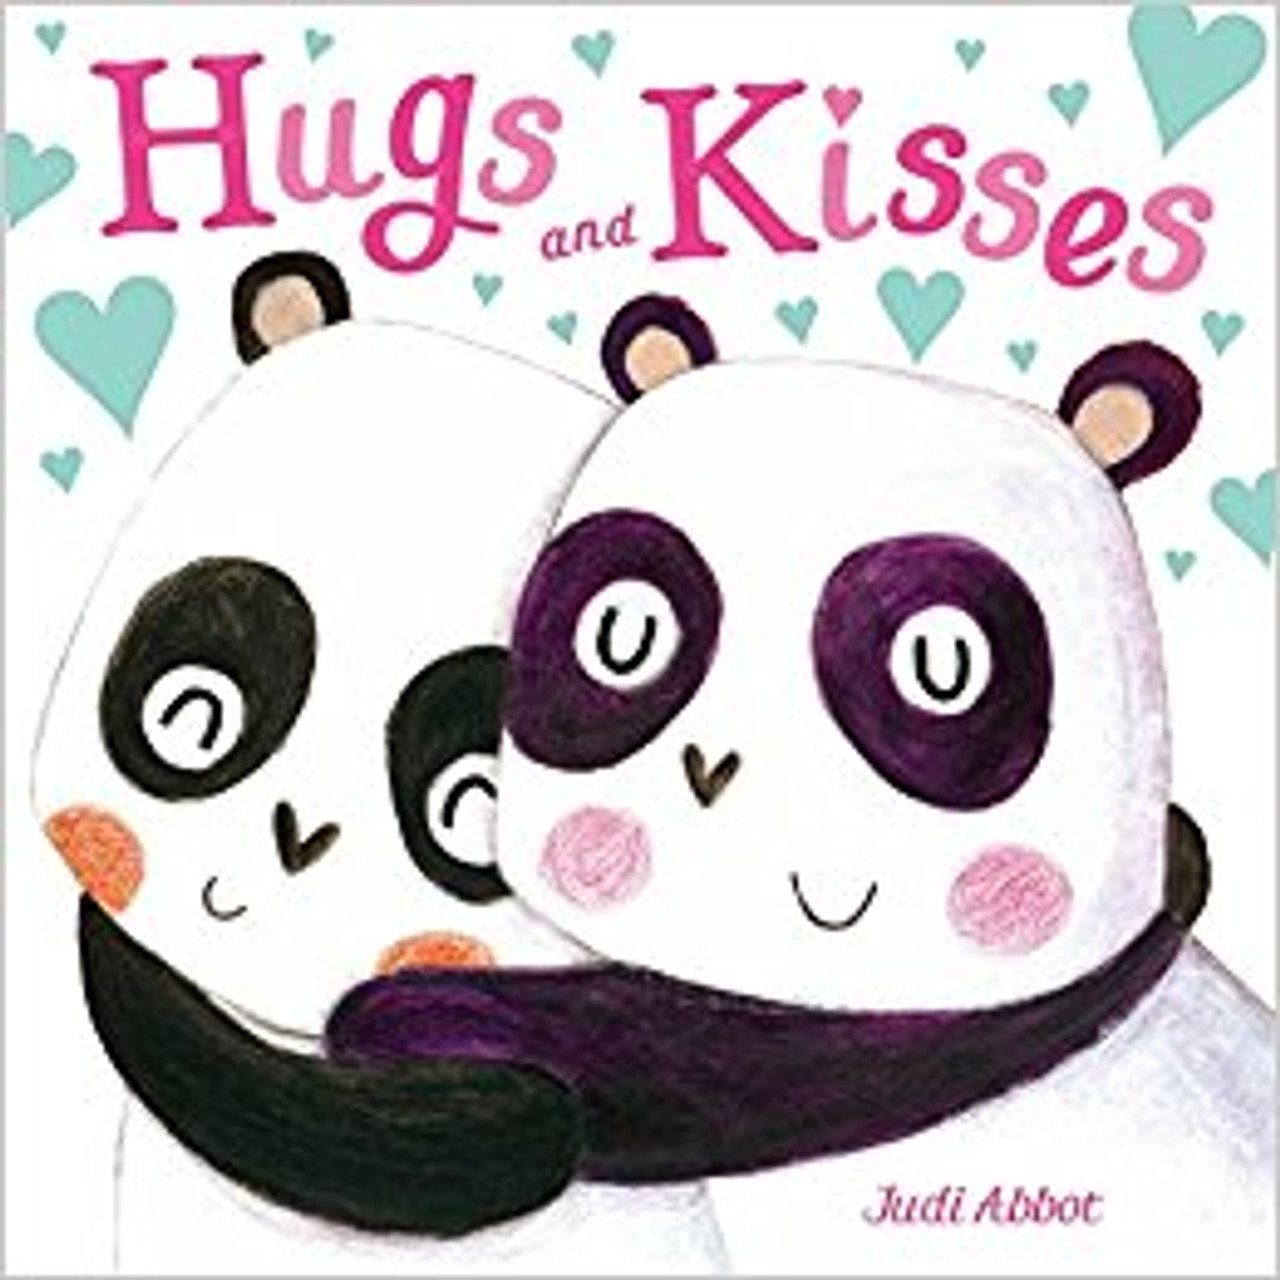 From the bestselling illustrator of The Perfect Hug and The Biggest Kiss, comes an adorable board book full of hugs and kisses!  This sweet board book features the same cast of adorable animals from The Biggest Kiss and The Perfect Hug by bestselling illustrator Judi Abbot.  Only this time, all the friends are in a brand-new story that proves everyone needs hugs AND kisses!